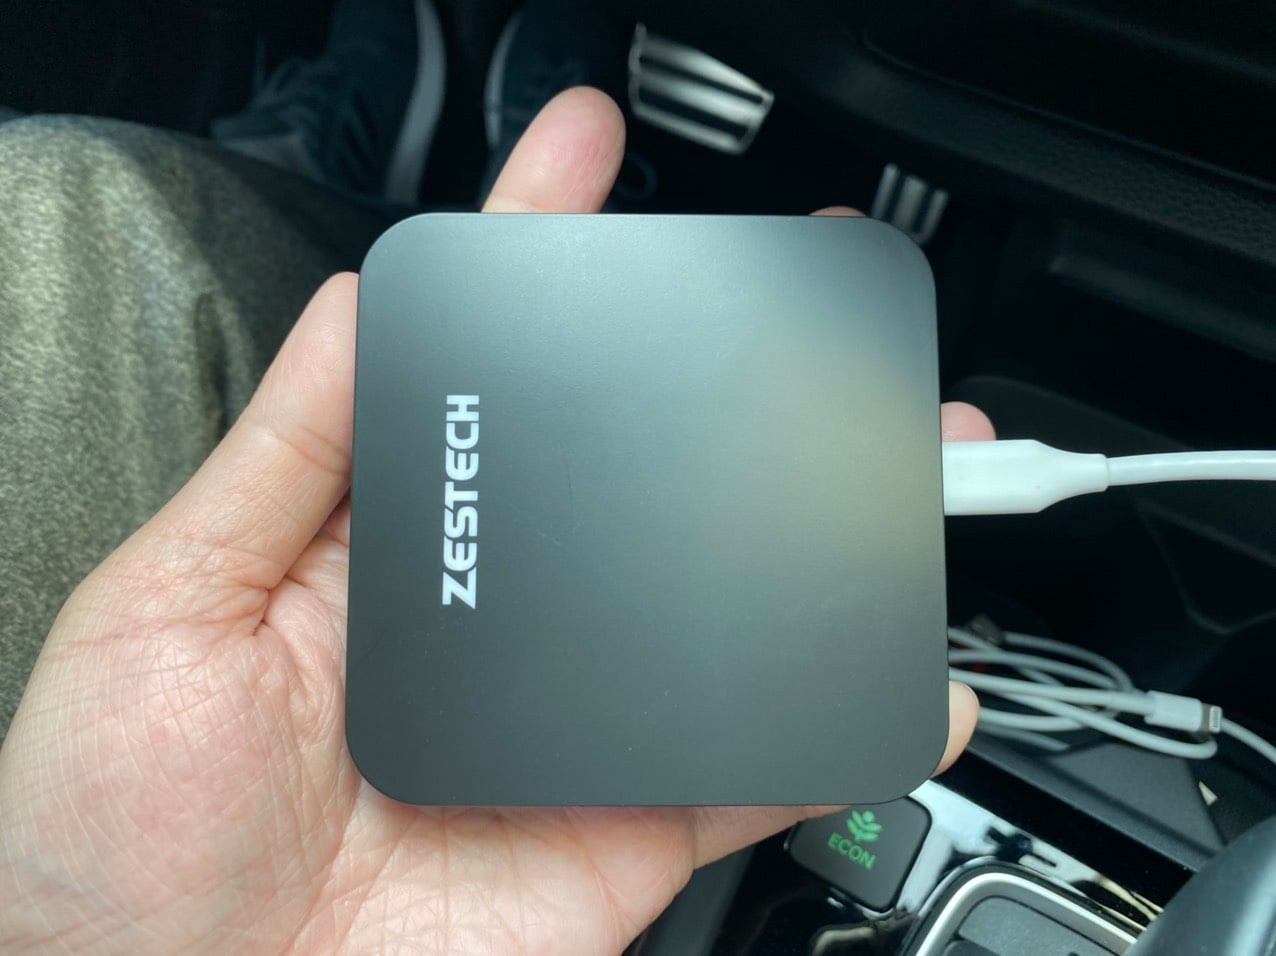 ANDROID BOX ZESTECH DX265